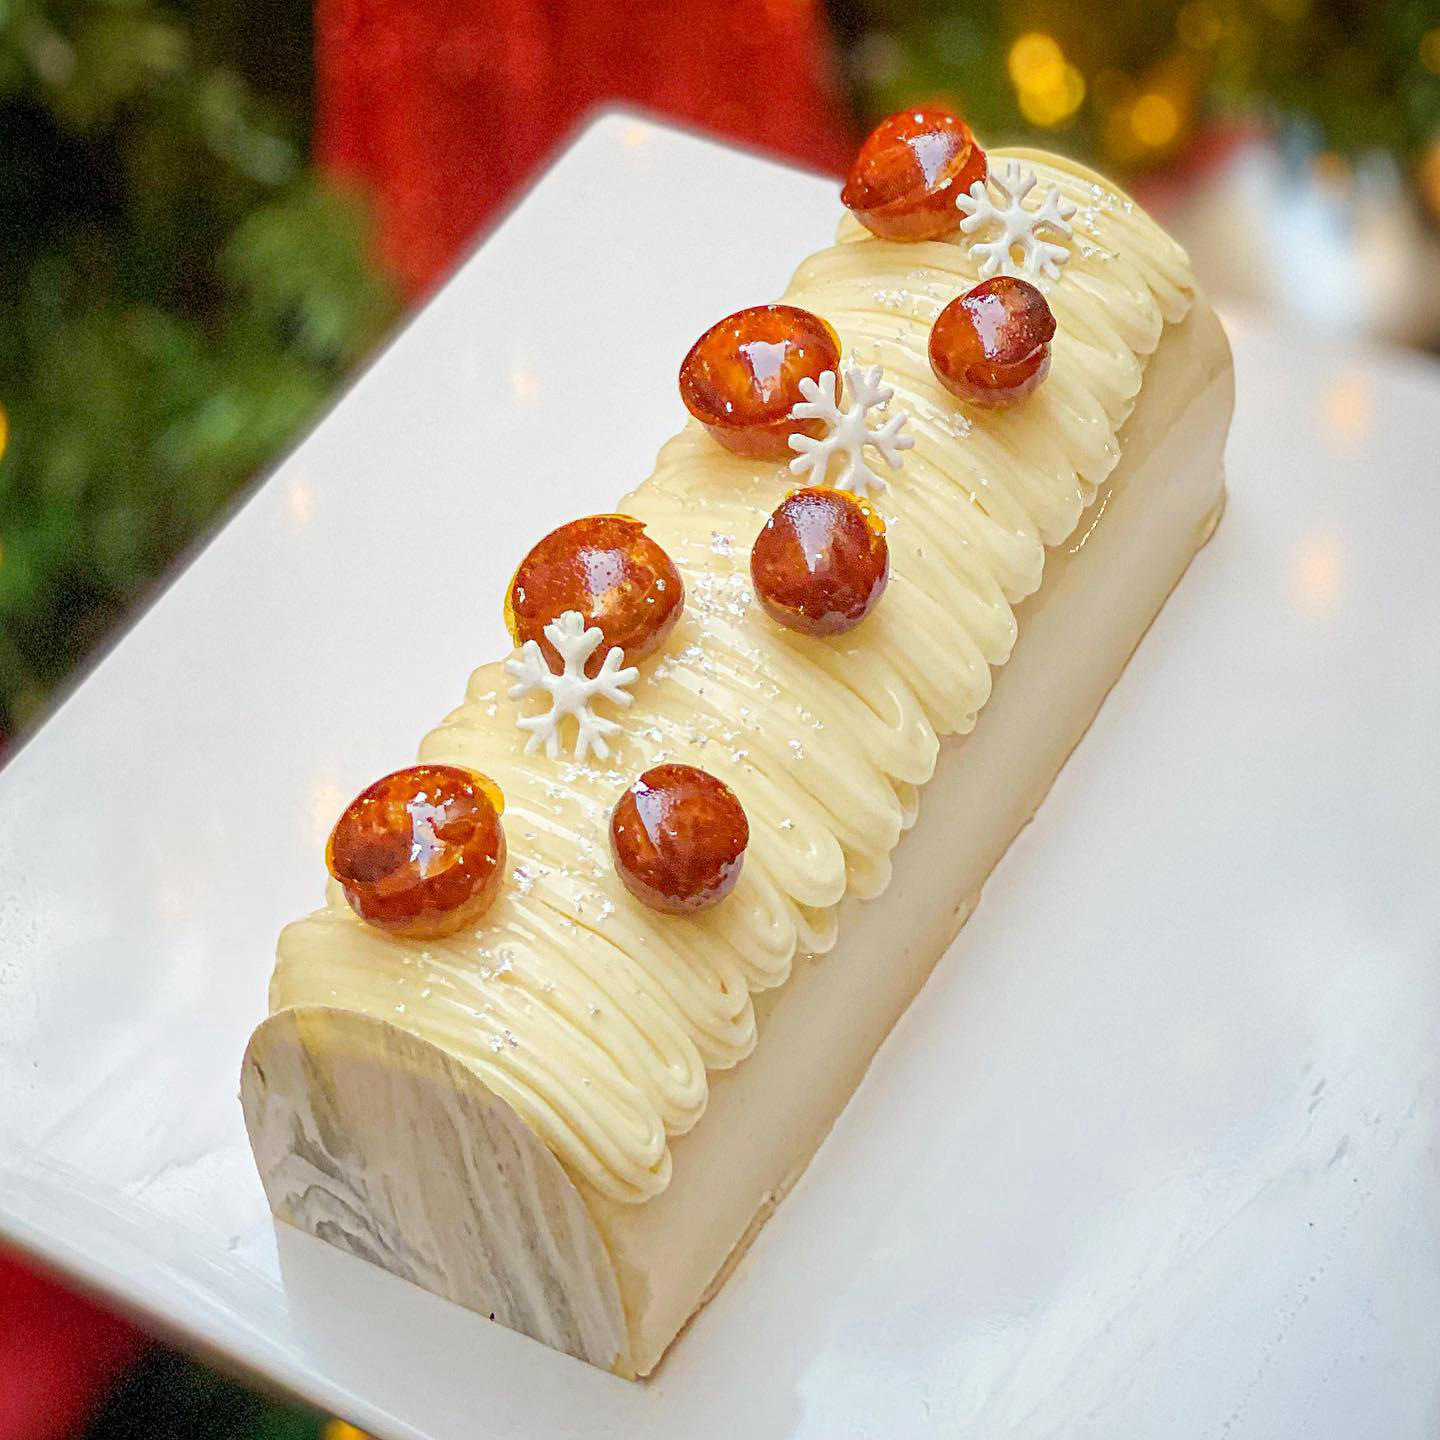 This is our new Buche de Noel at #bachourmiami for pre order to pick up Dec 23-24 , the first one is